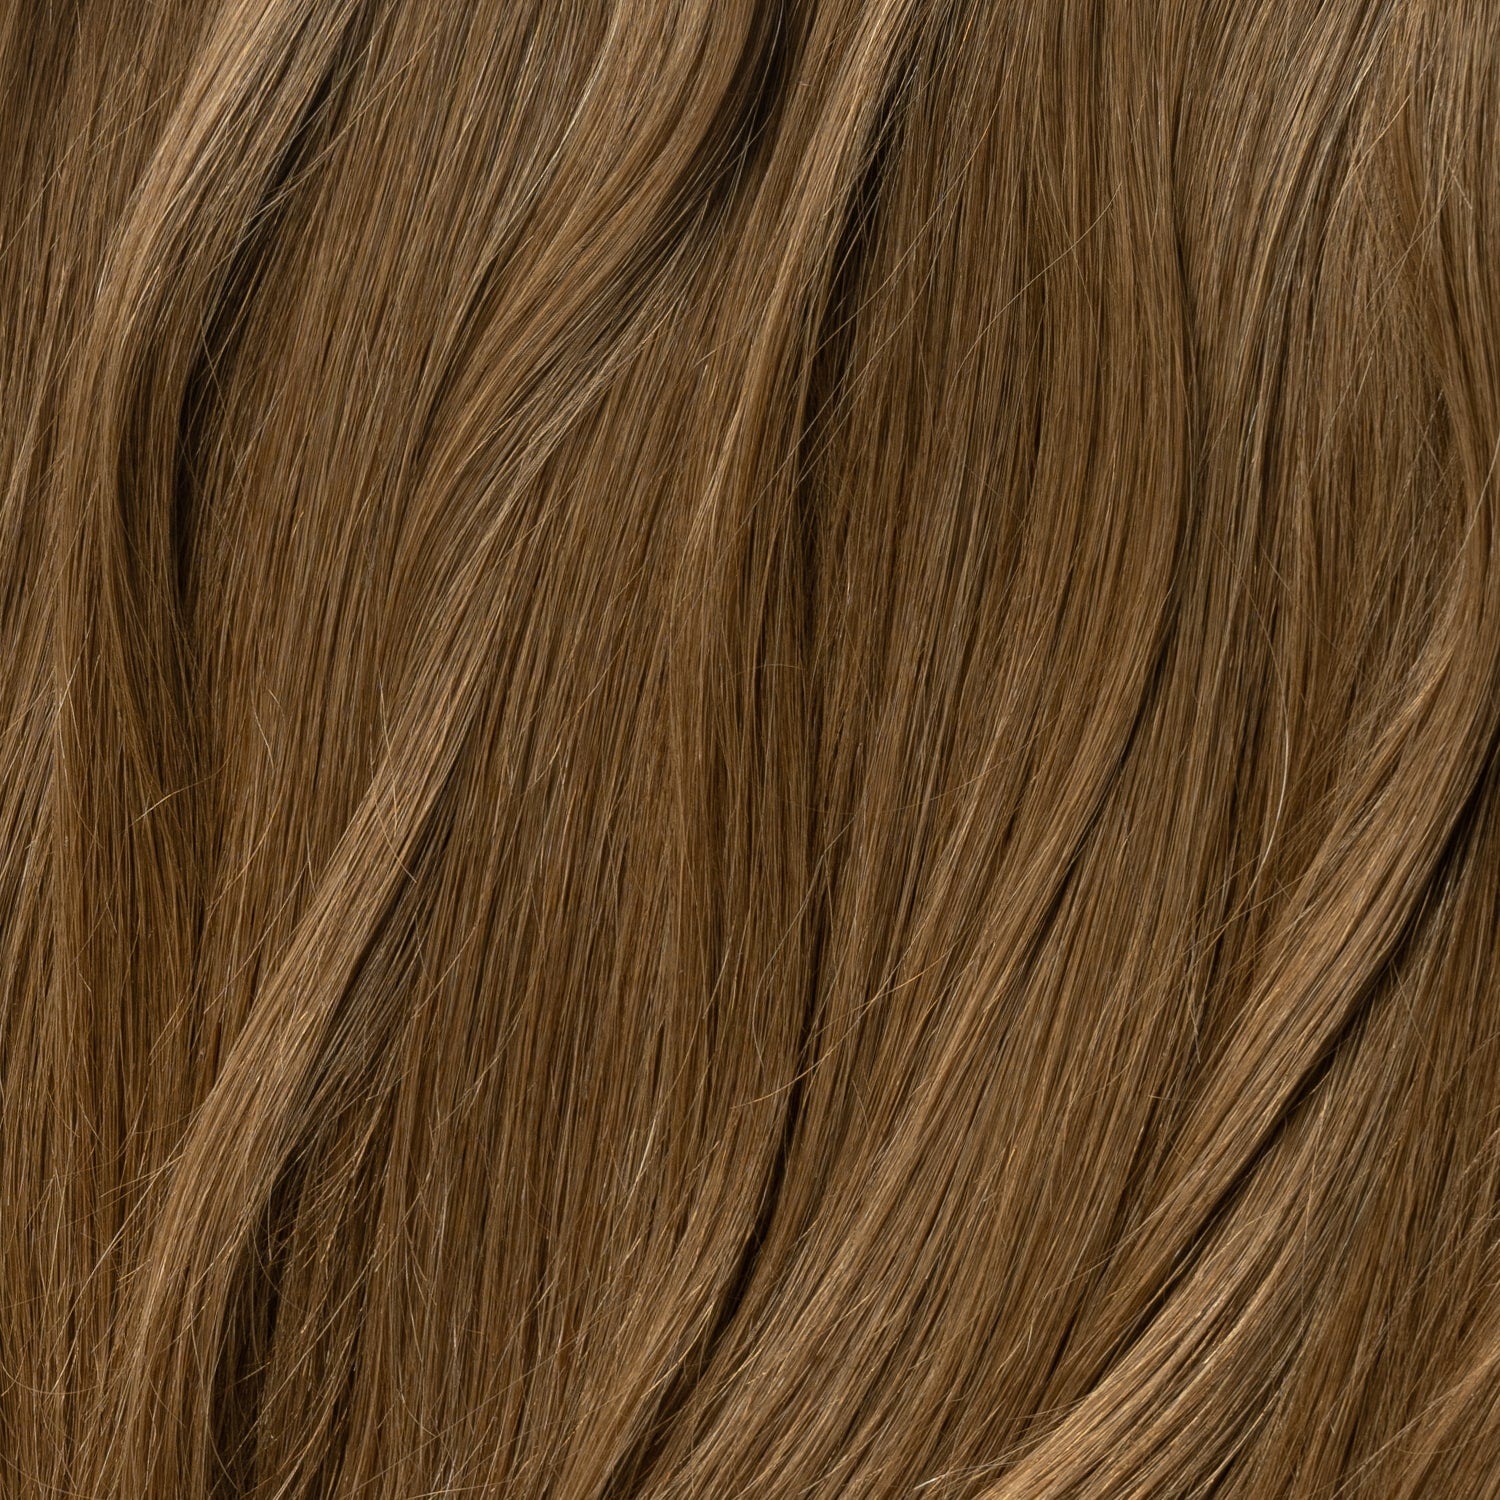 Clip in - Natural Brown 3